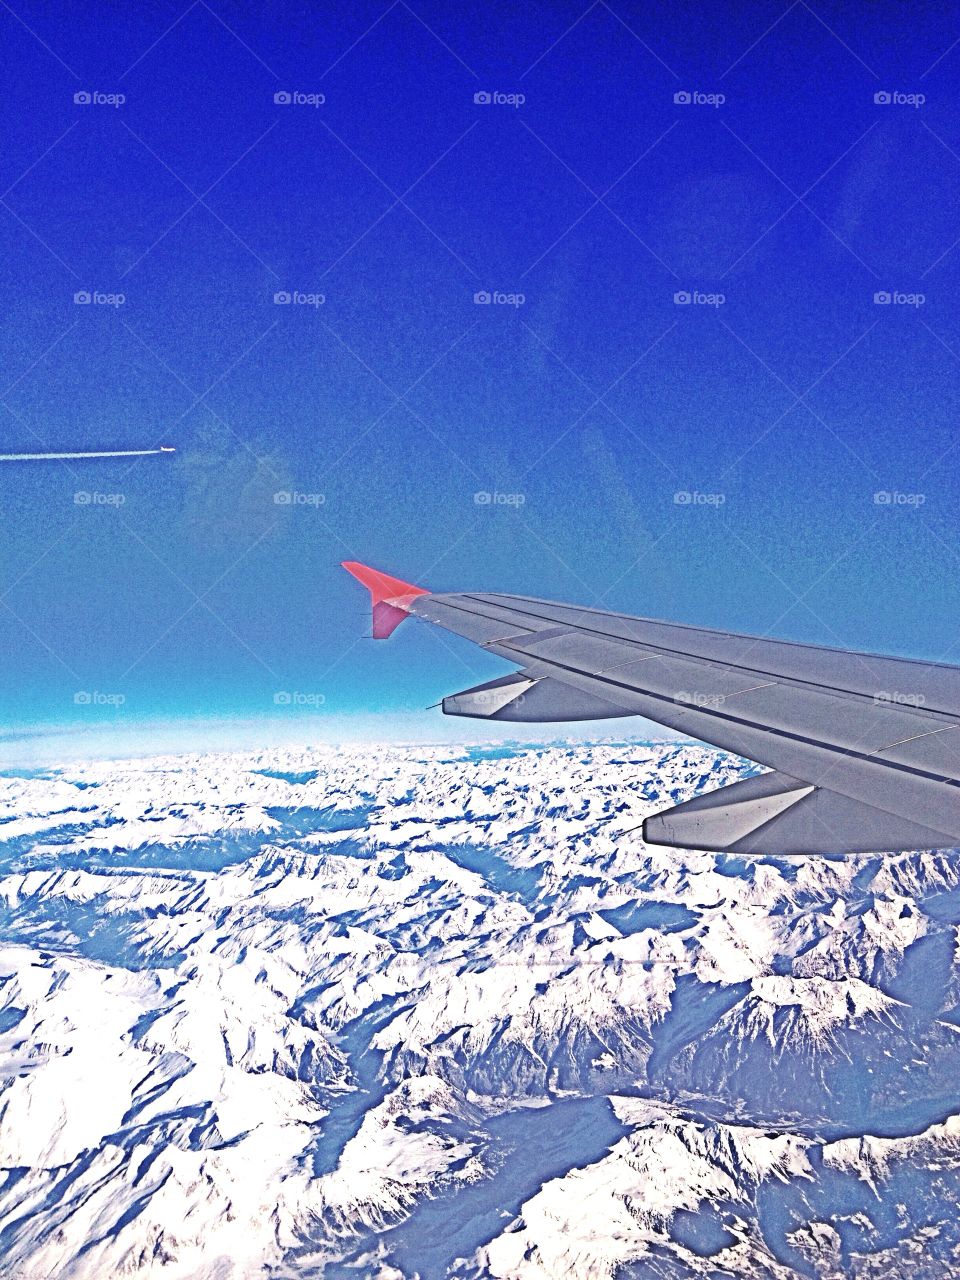 Over the alps 